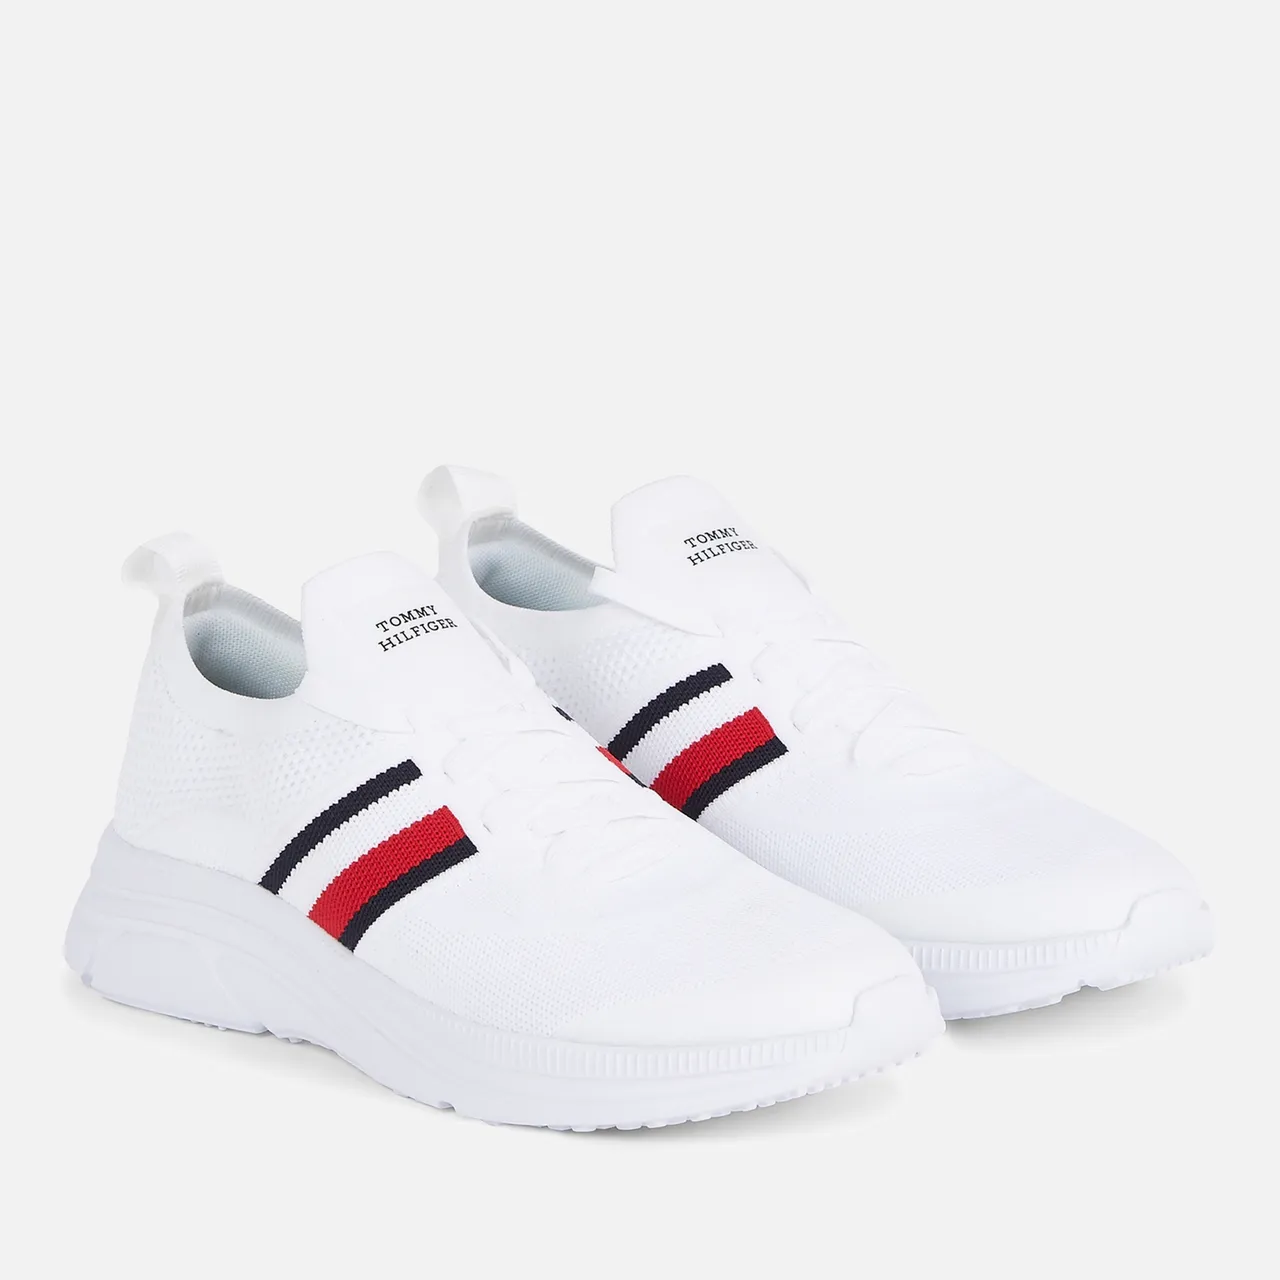 Tommy Hilfiger Men's Running-Style Leather Trainers